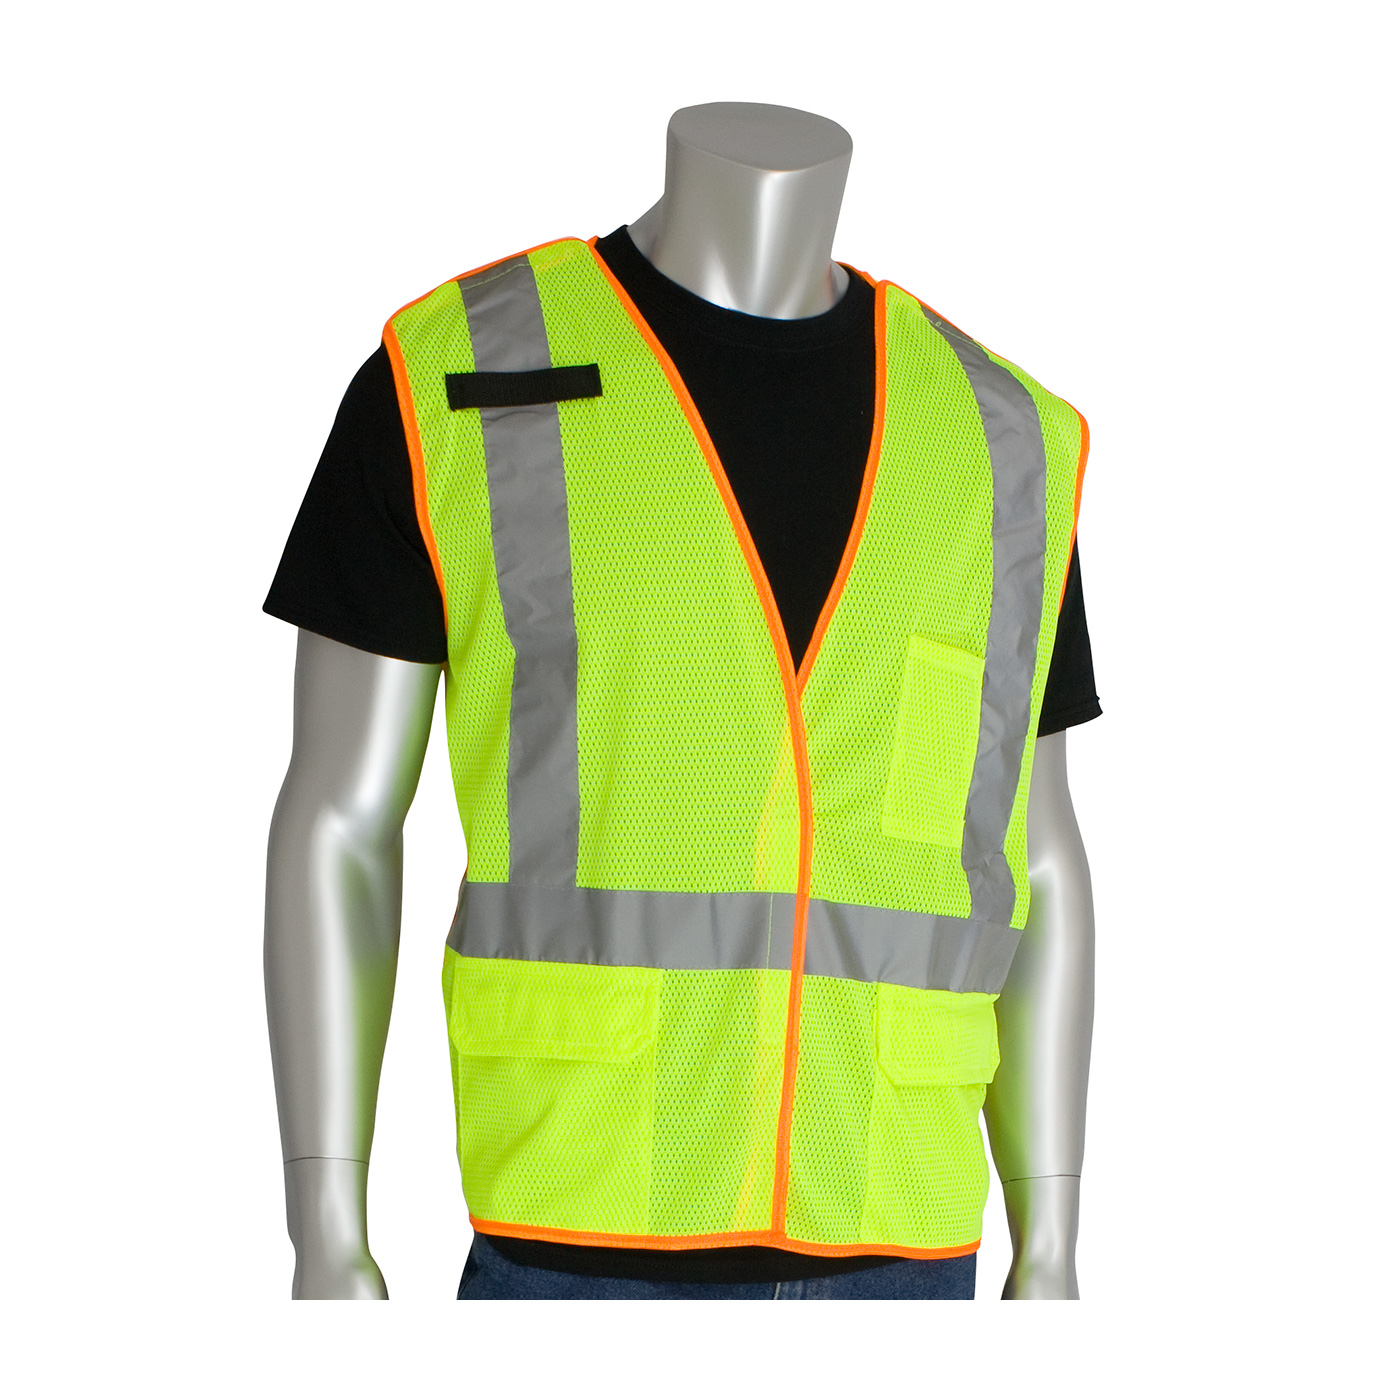 PIP® ANSI Type R Class 2 and CAN/CSA Z96 X-Back Breakaway Mesh Vest #302-0210-LY